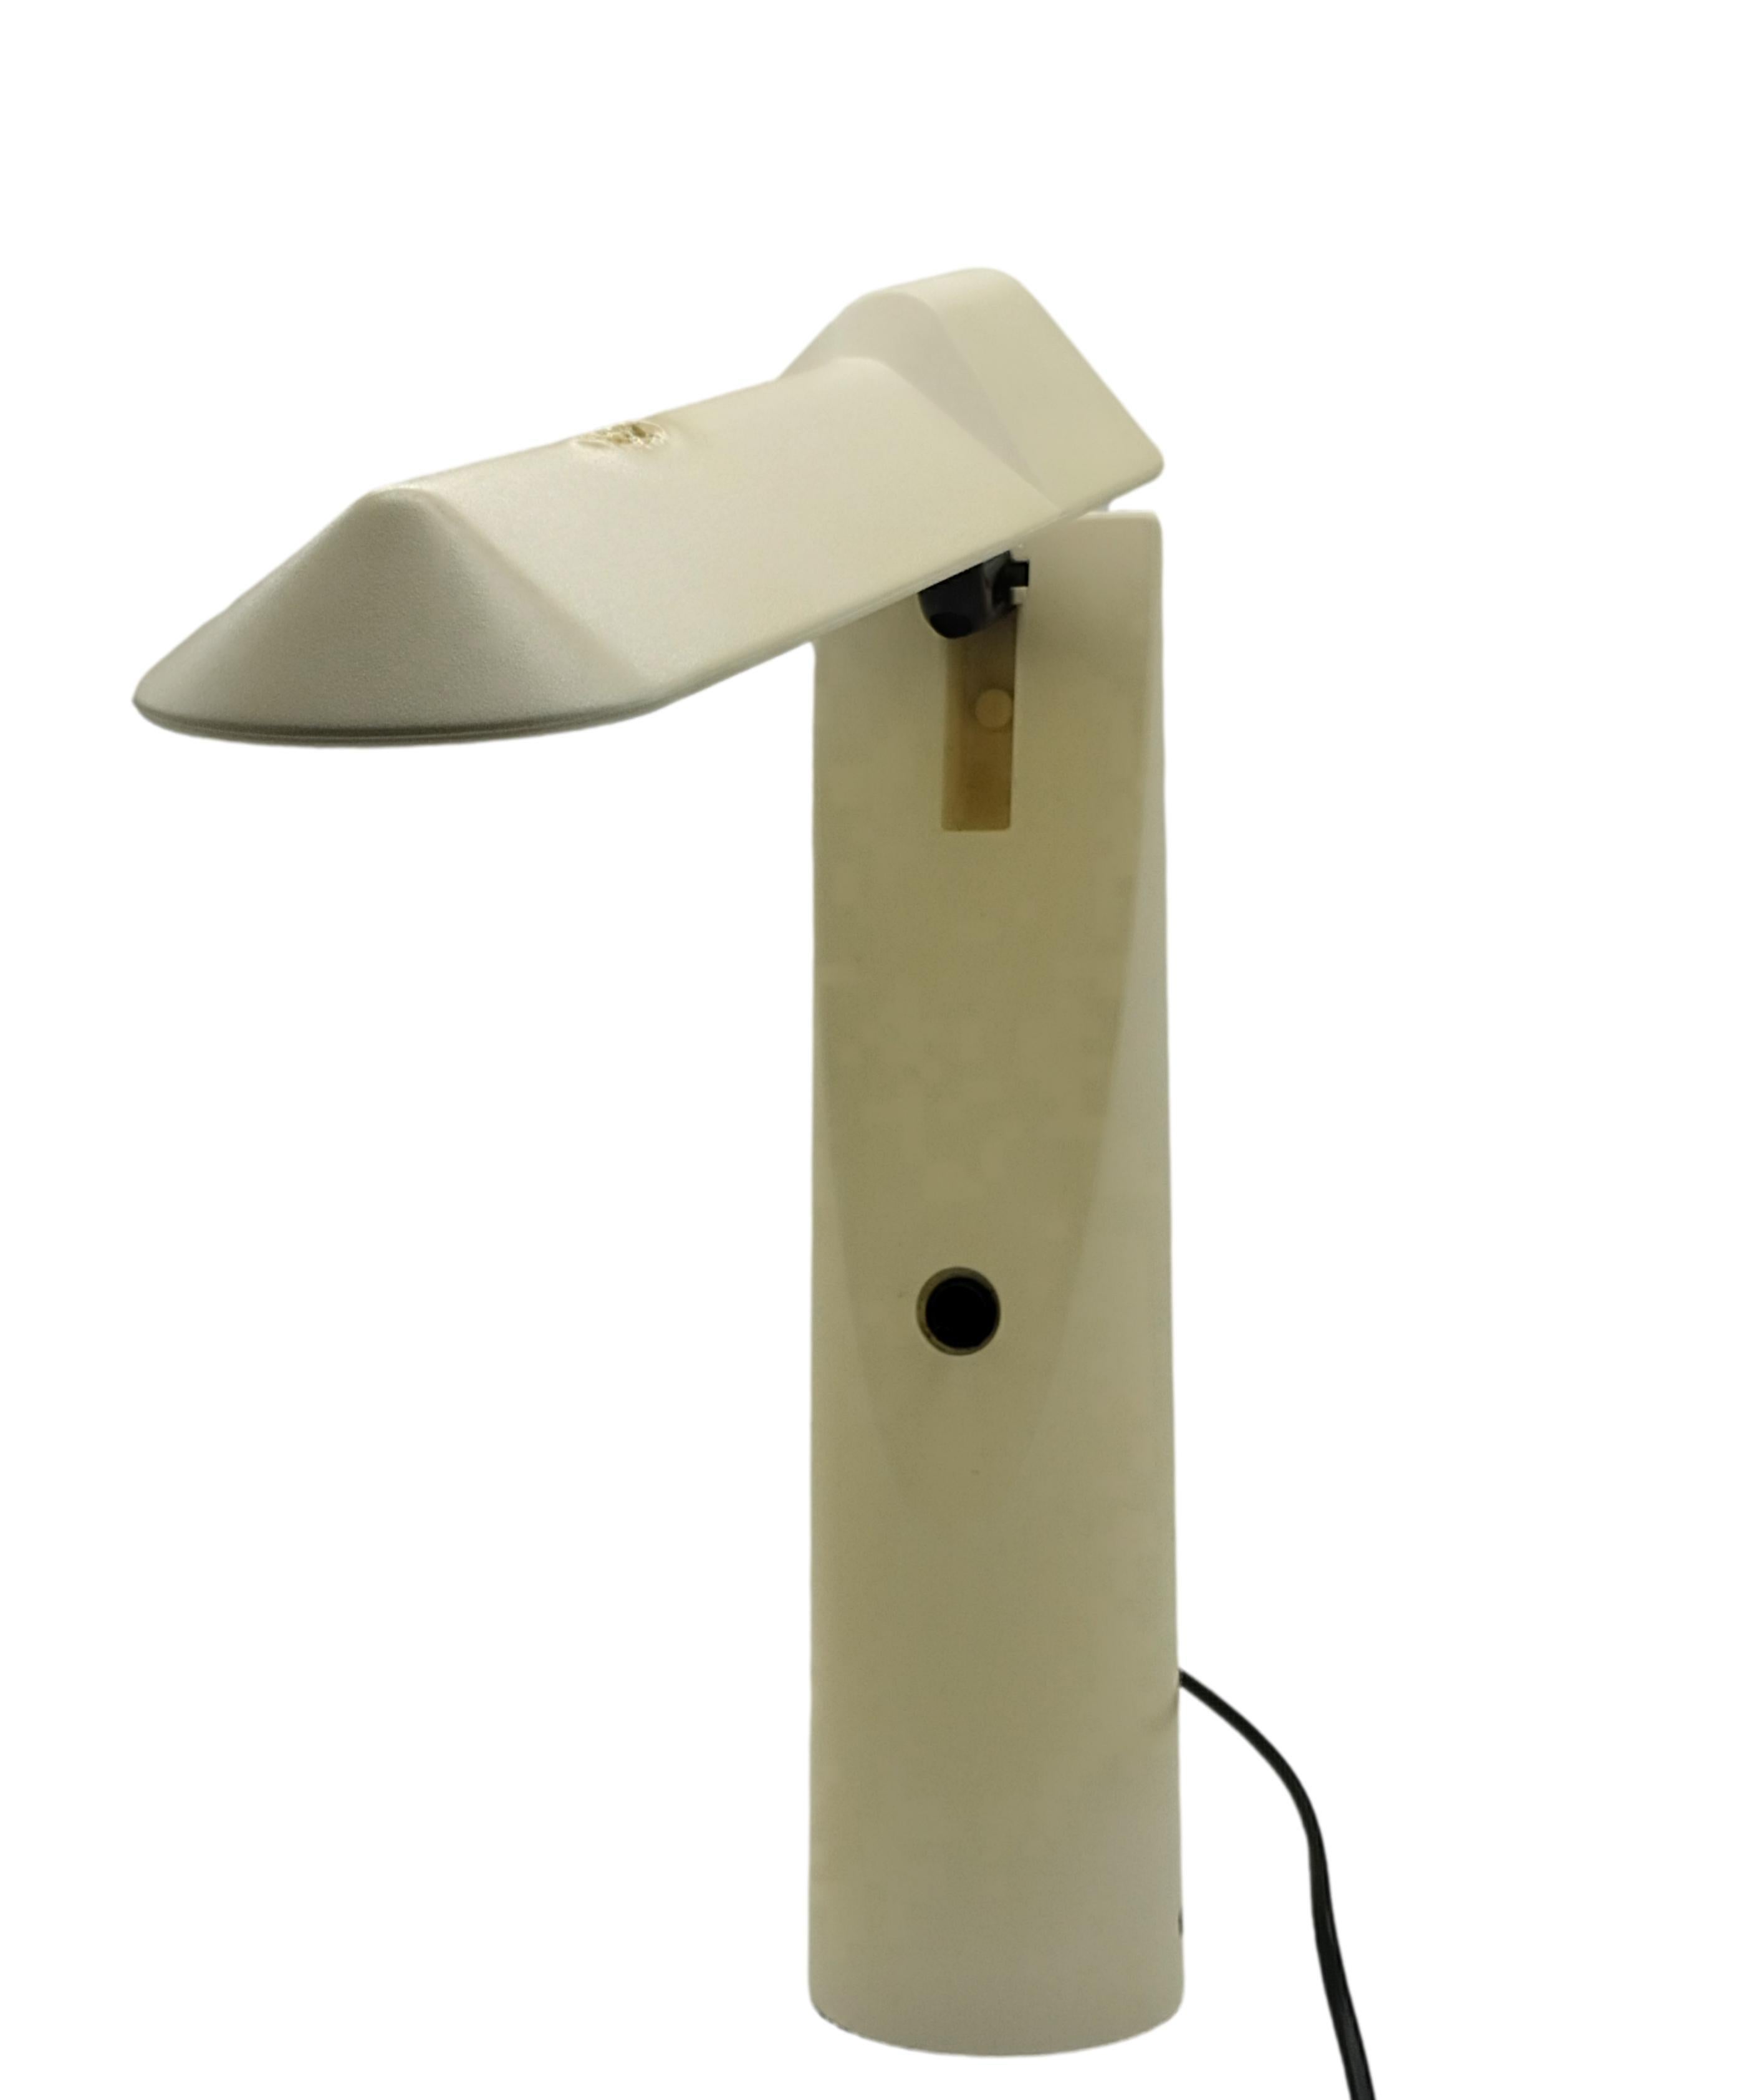 
Picchio table lamp by Japanese designer Isao Hosoe and produced by Luxo Italiana in 1984.
Elegant and functional table lamp made of ABS.
 The top of the Picchio lamp is fully adjustable, encloses an aluminum reflector, and is arranged to hold a